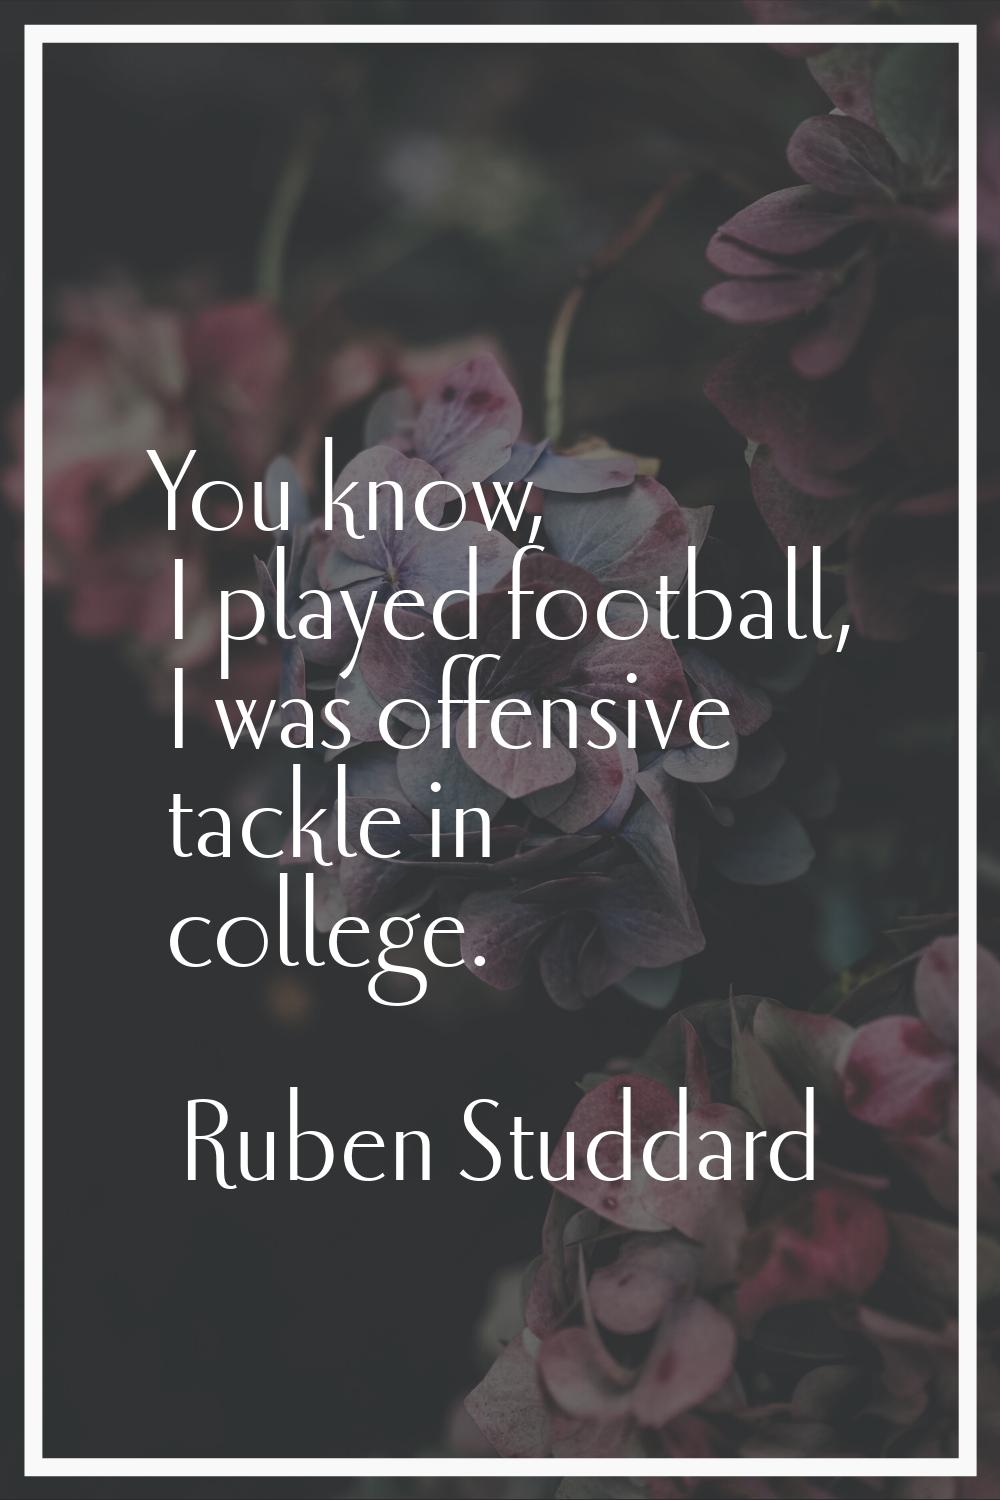 You know, I played football, I was offensive tackle in college.